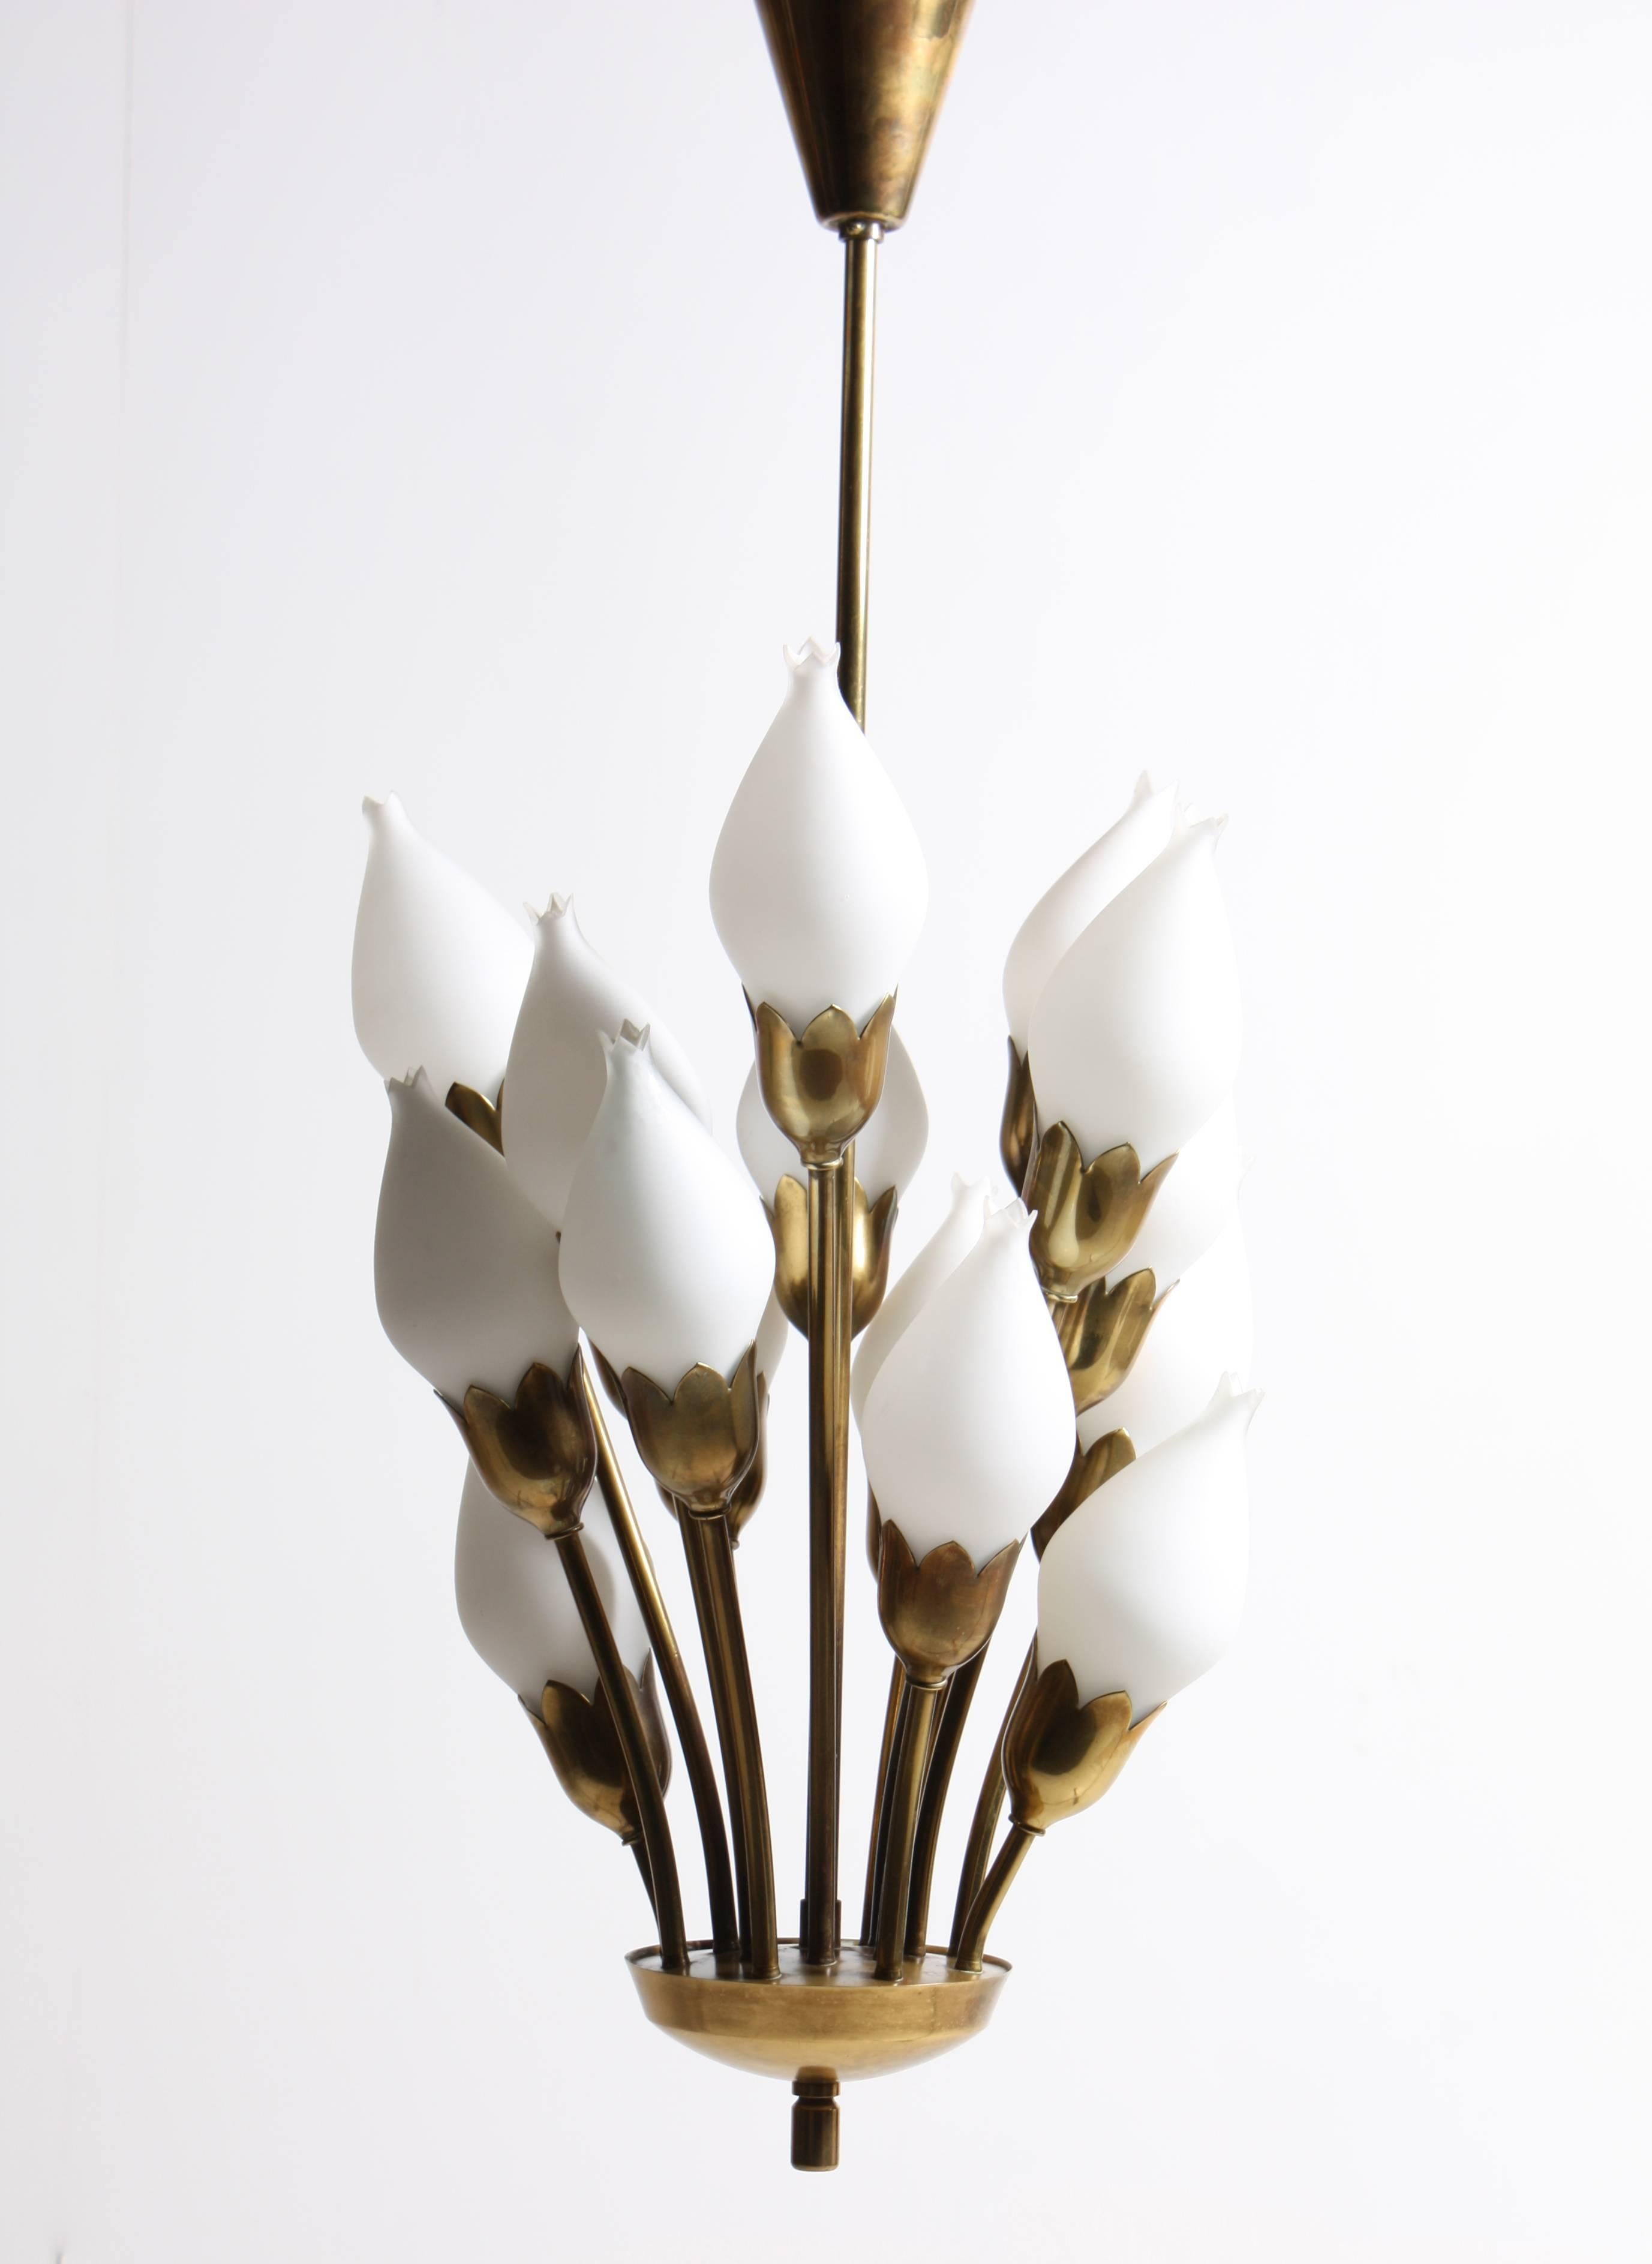 1950s tulip chandelier in brass and white glass, designed and made by Fog & Mørup, Denmark. Great original condition.